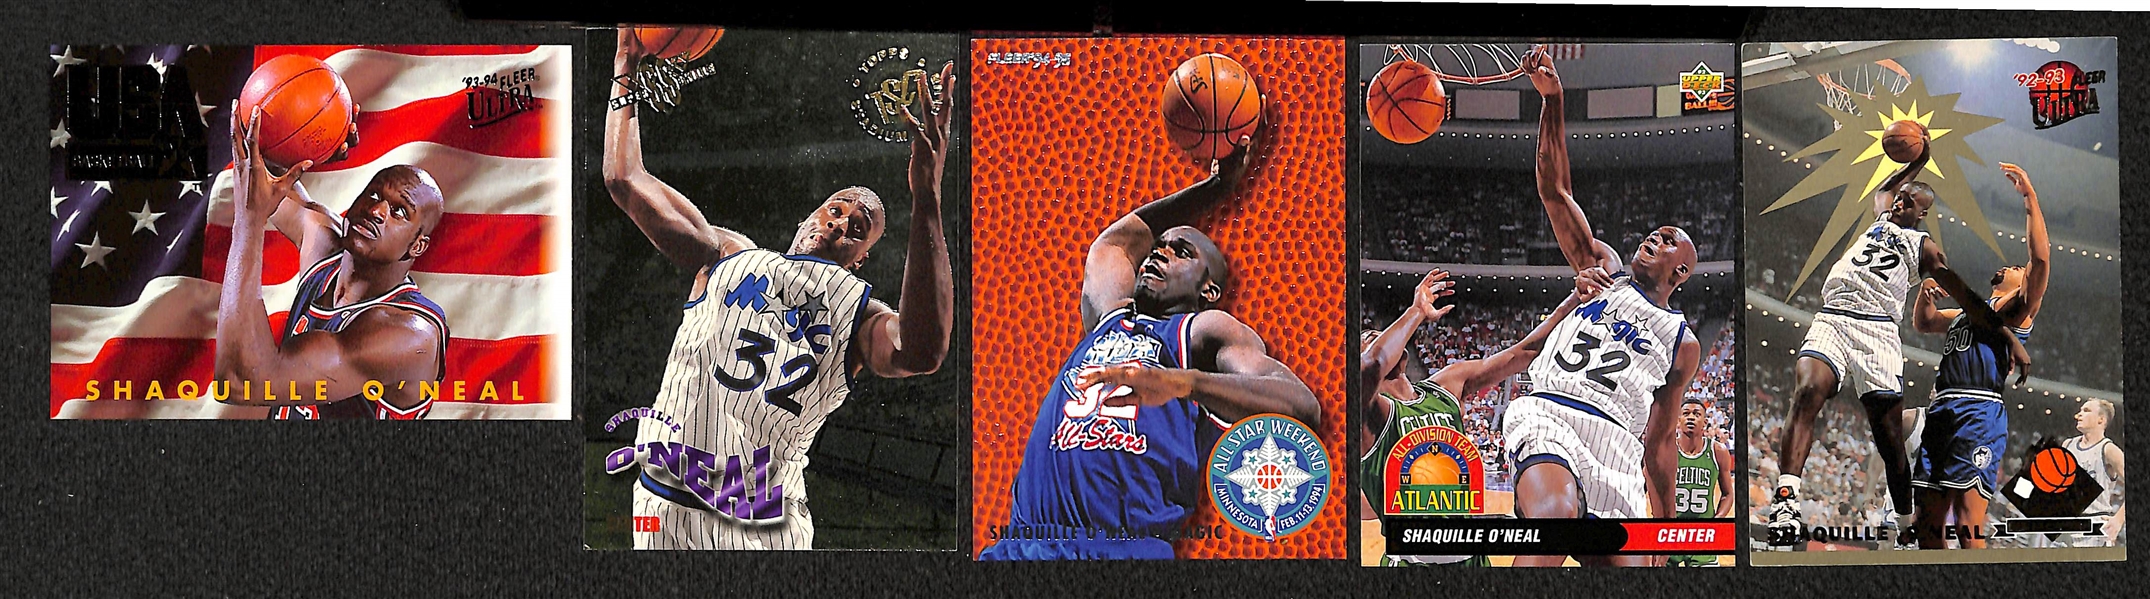 Huge 180+ Shaquille O'Neal Basketball Card Lot - Mostly Rookies